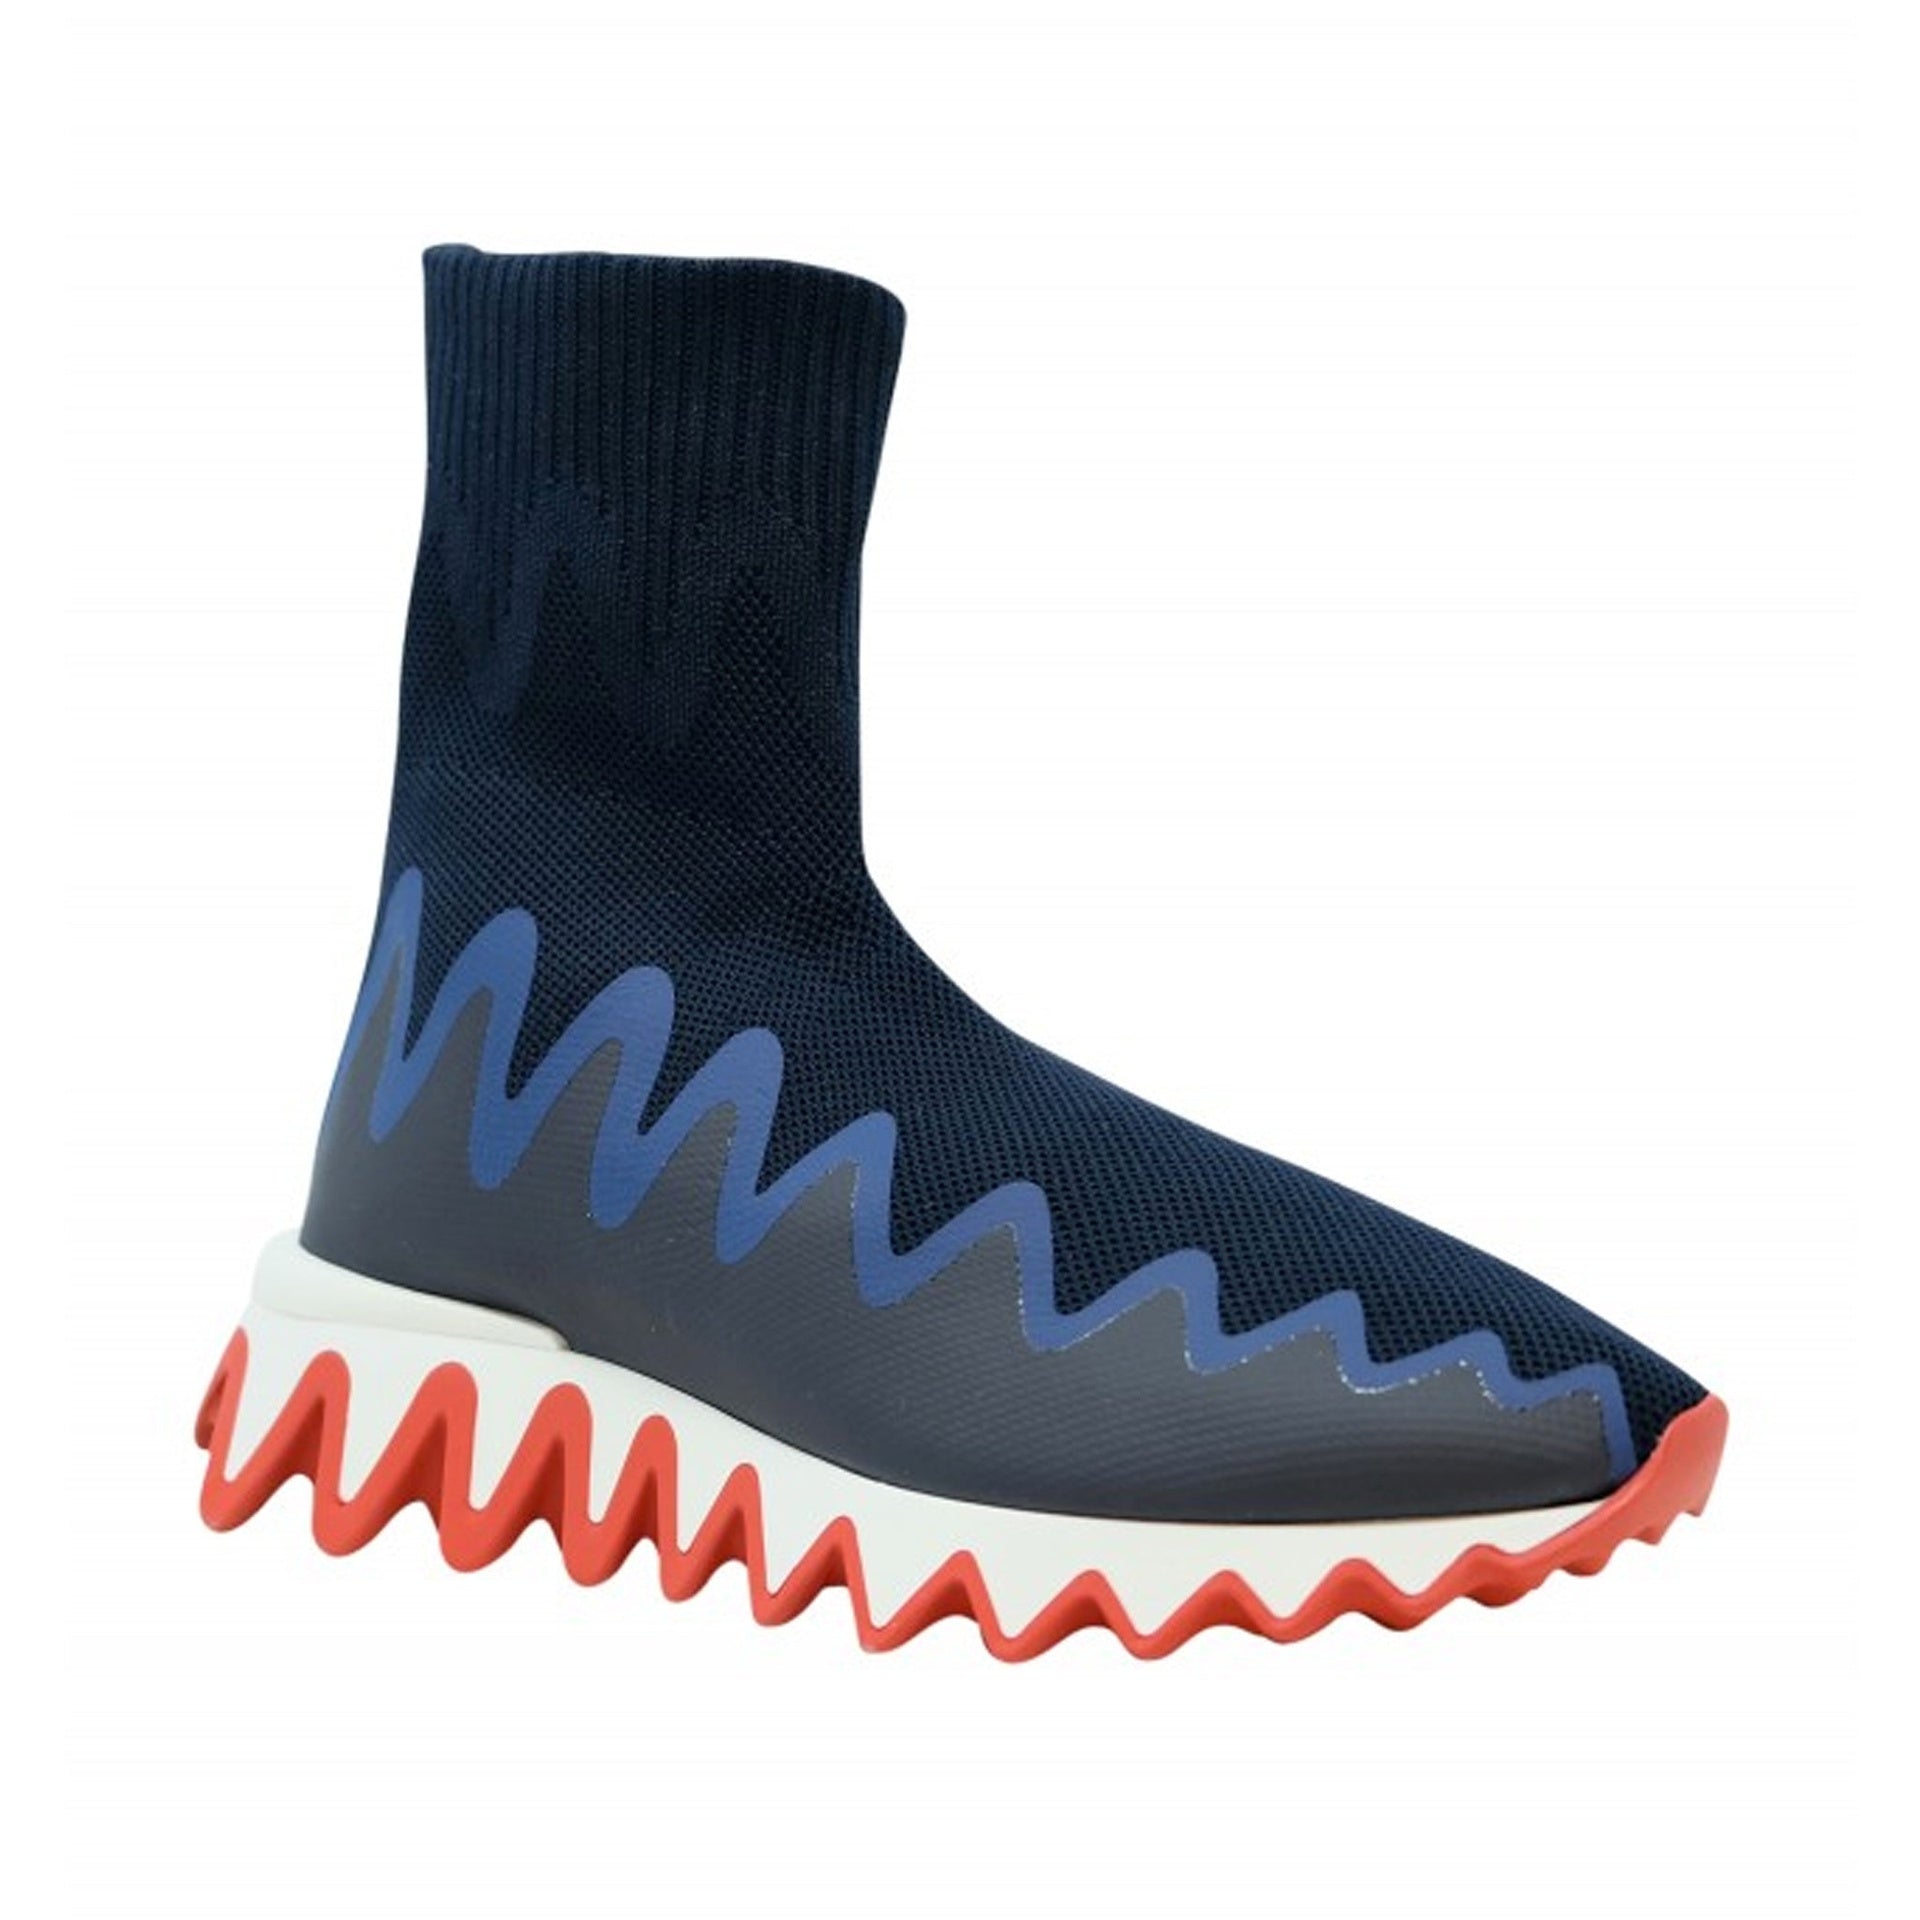 CHRISTIAN-LOUBOUTIN-OUTLET-SALE-Christian-Louboutin-Sharky-Sock-Sneakers-Sneakers-ARCHIVE-COLLECTION-2.jpg